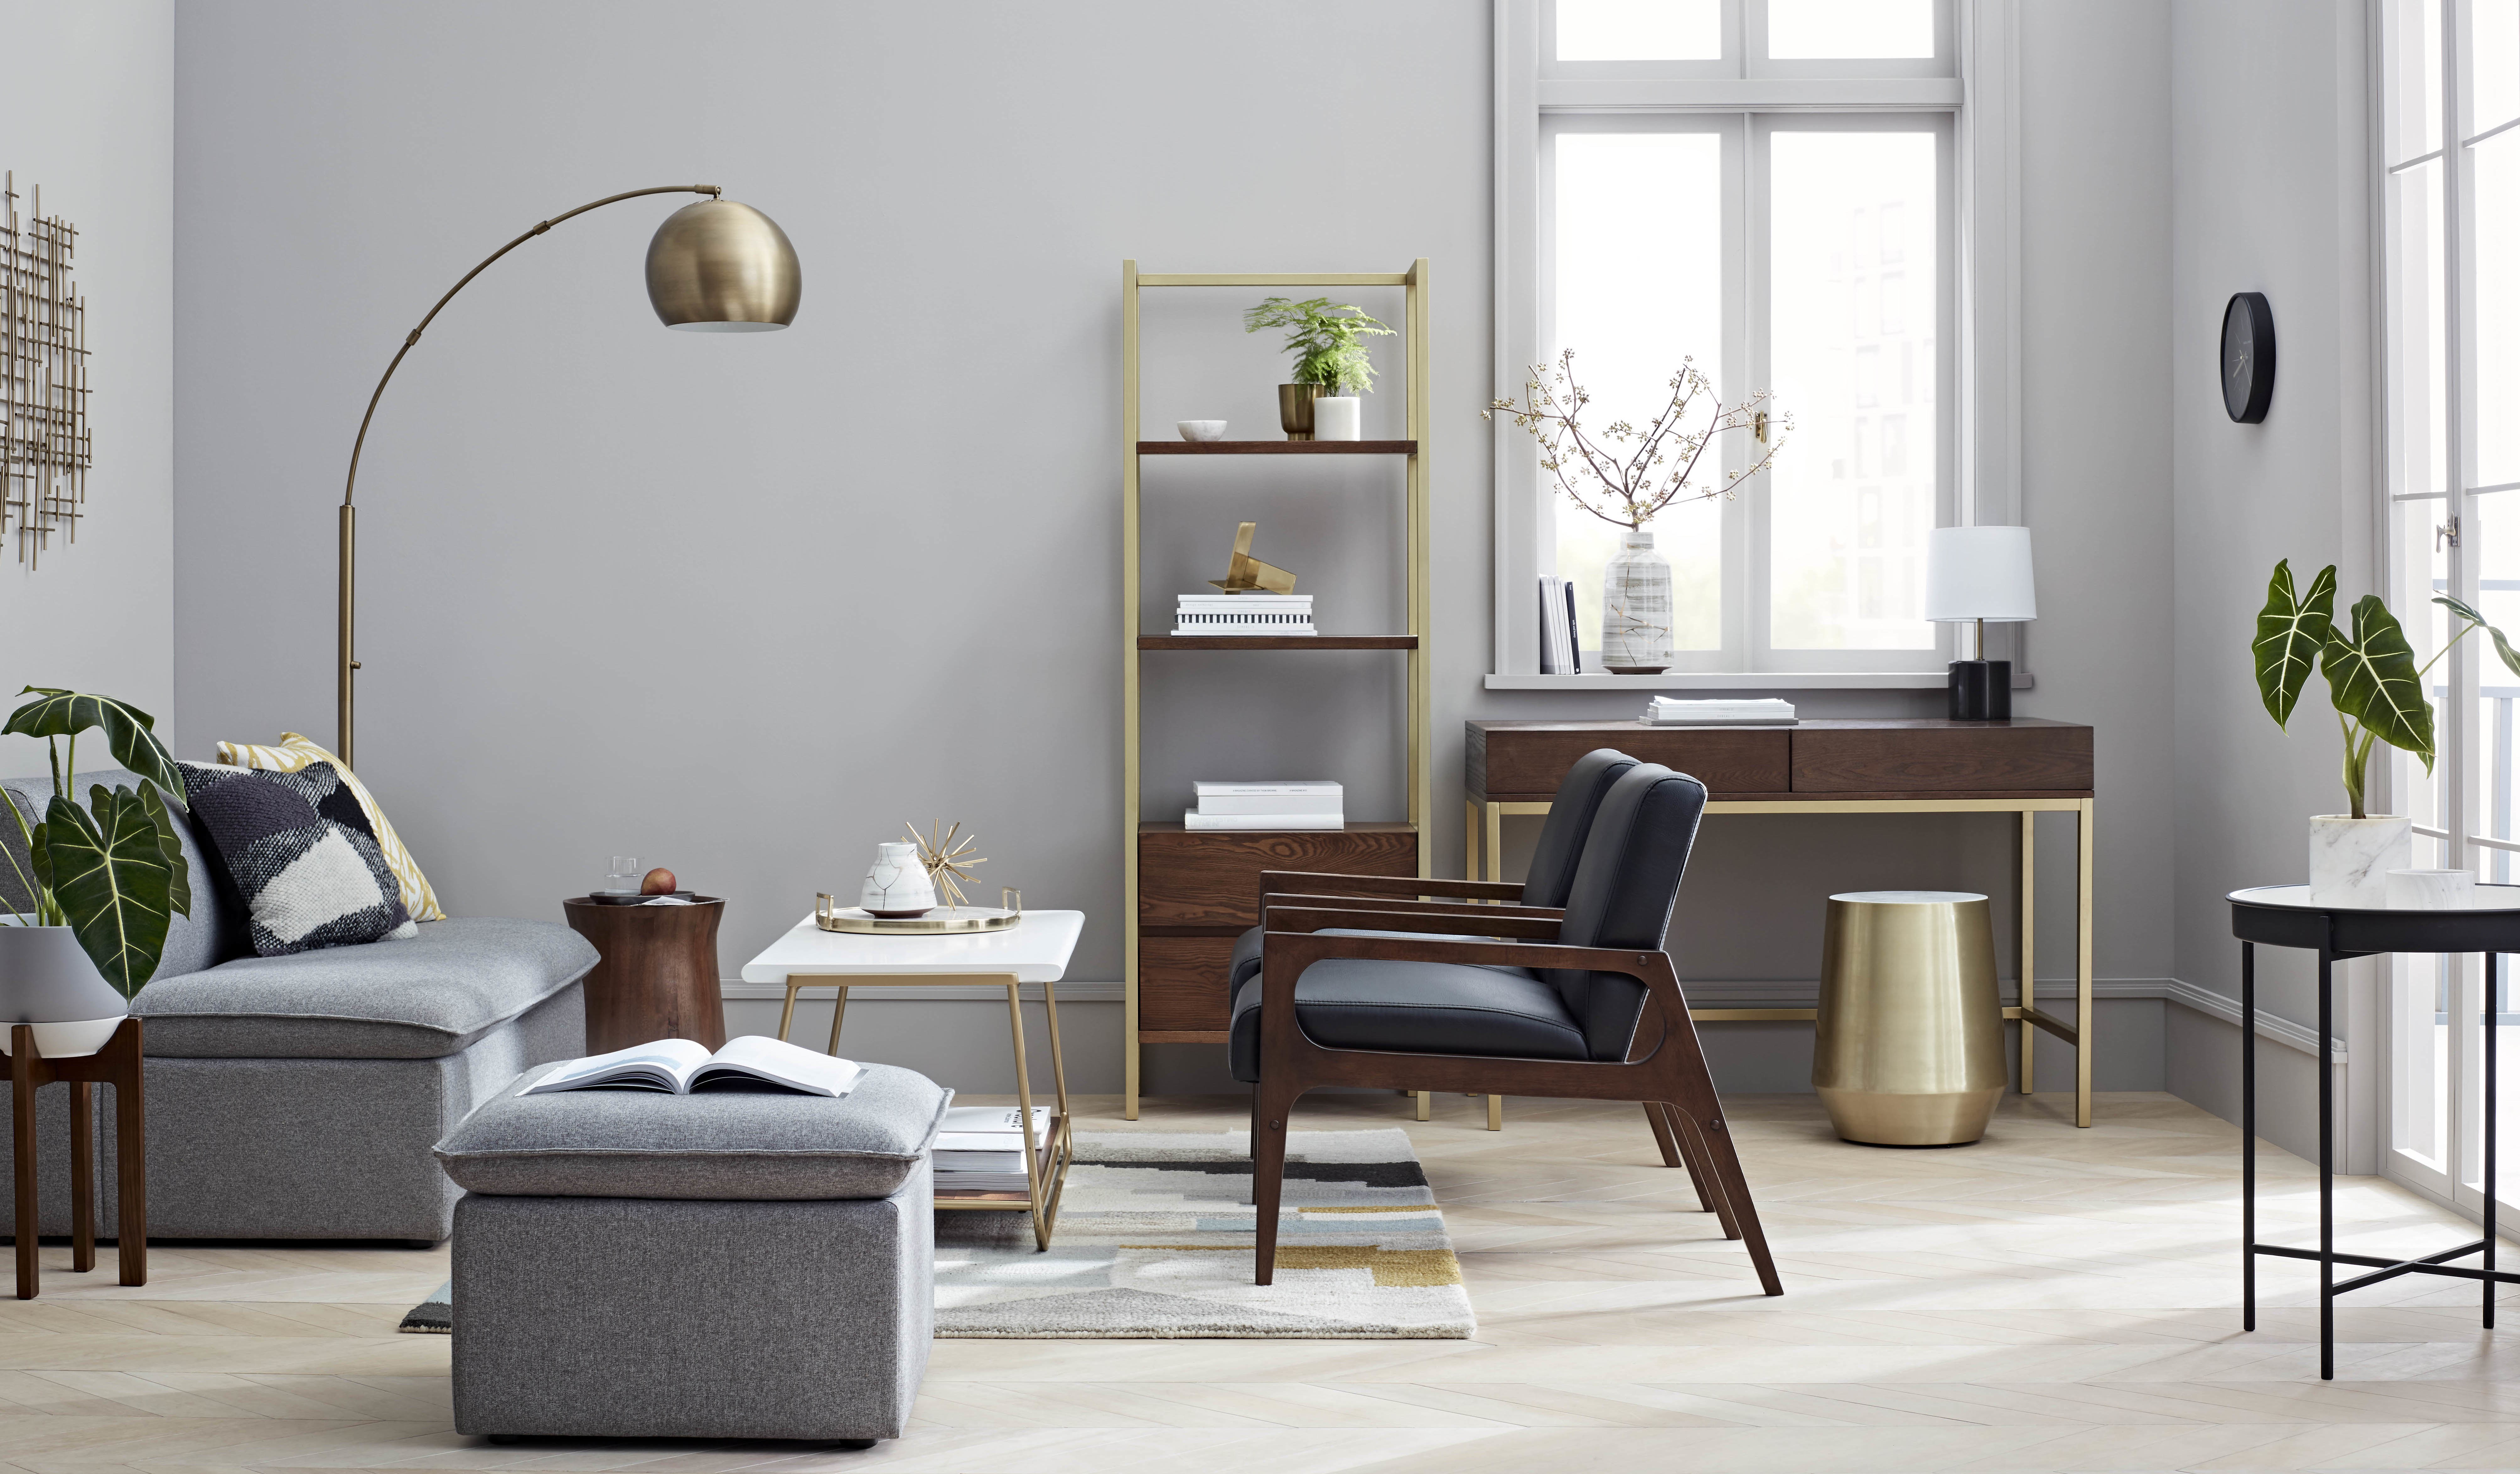 first look project target newest furniture line fallhome smliving ism room essentials white accent table architectural digest small mirrored end lobby chairs house accessories